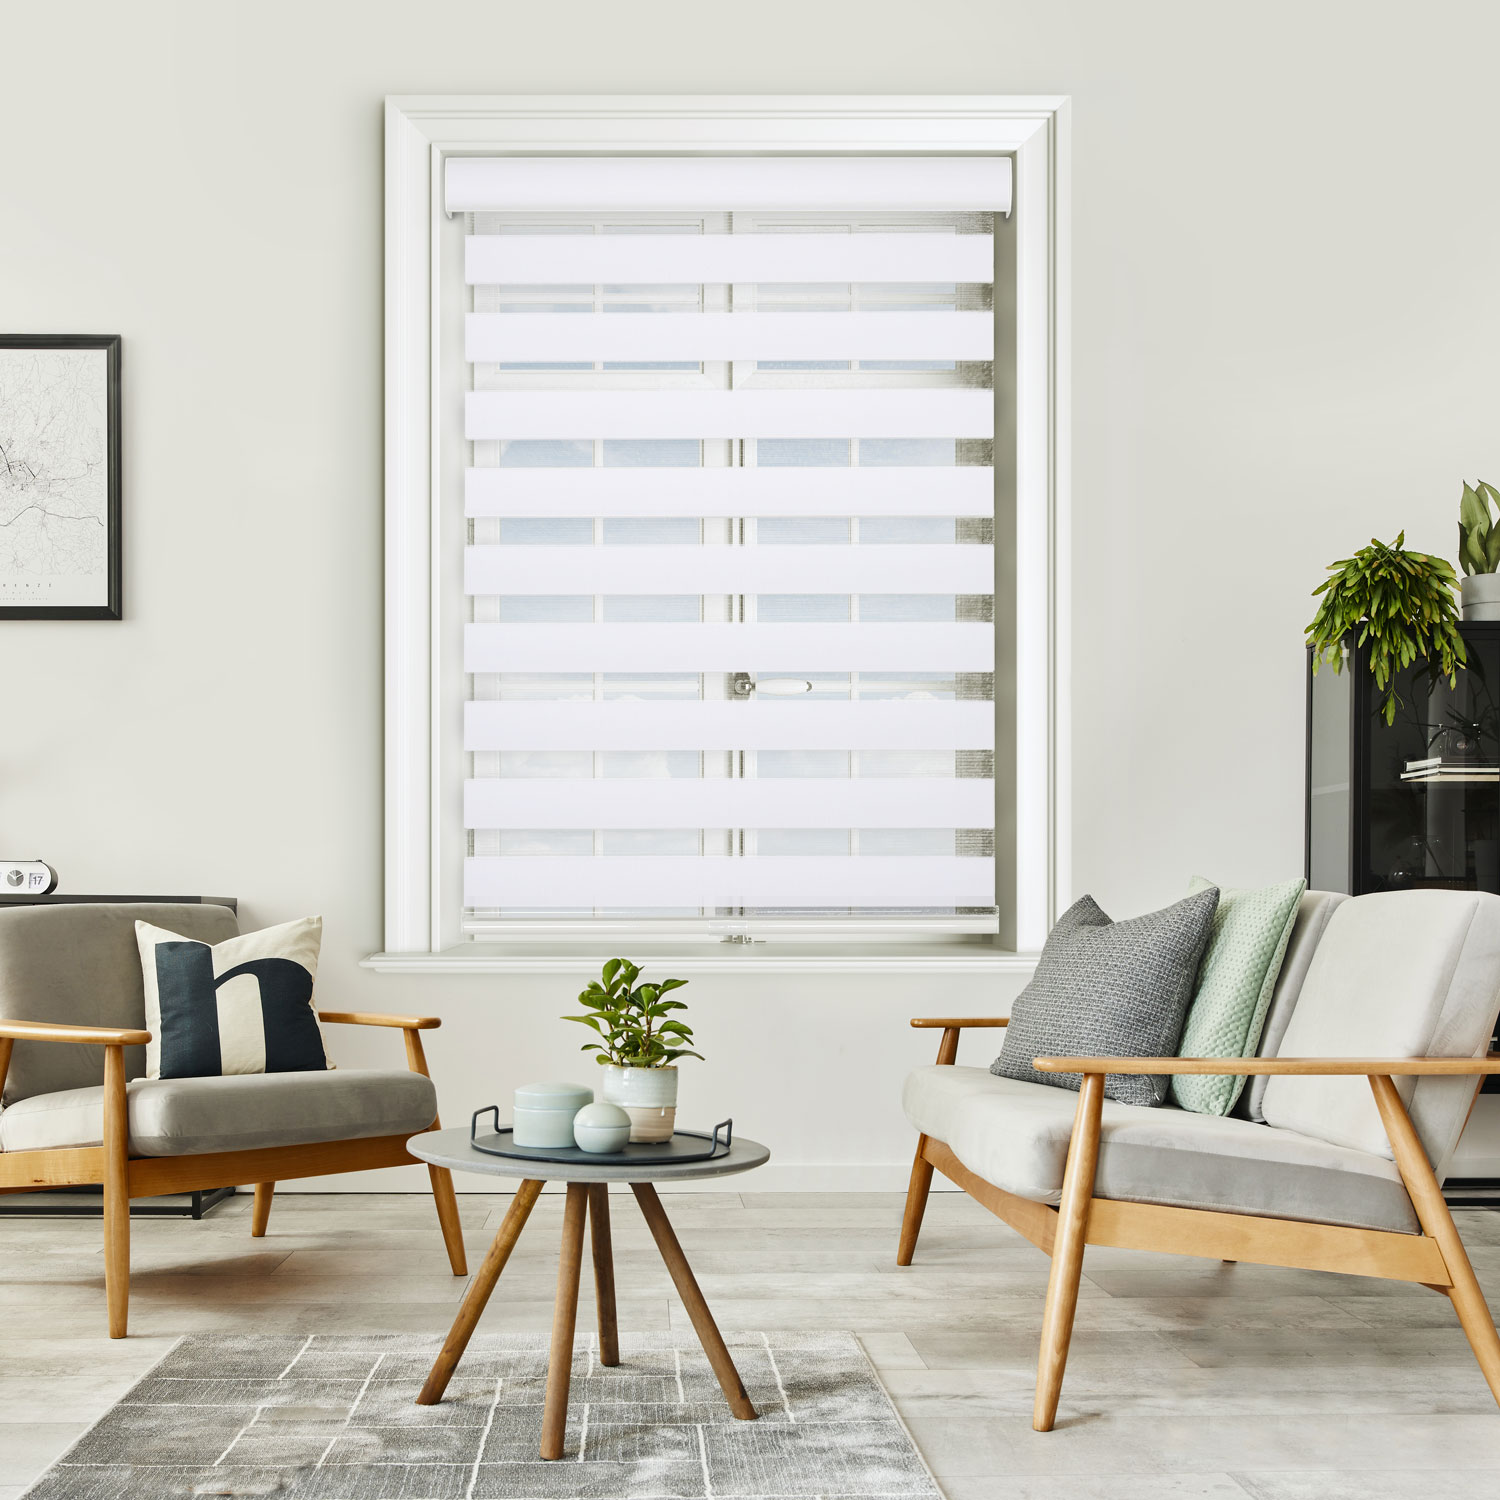 RBS31GY72A MYshade Zebra Blinds for Windows Cordless Windows Shades Light Filtering Window Treatments Privacy Light Control for Day and Night Easy to Install 31 W X 72 H Grey